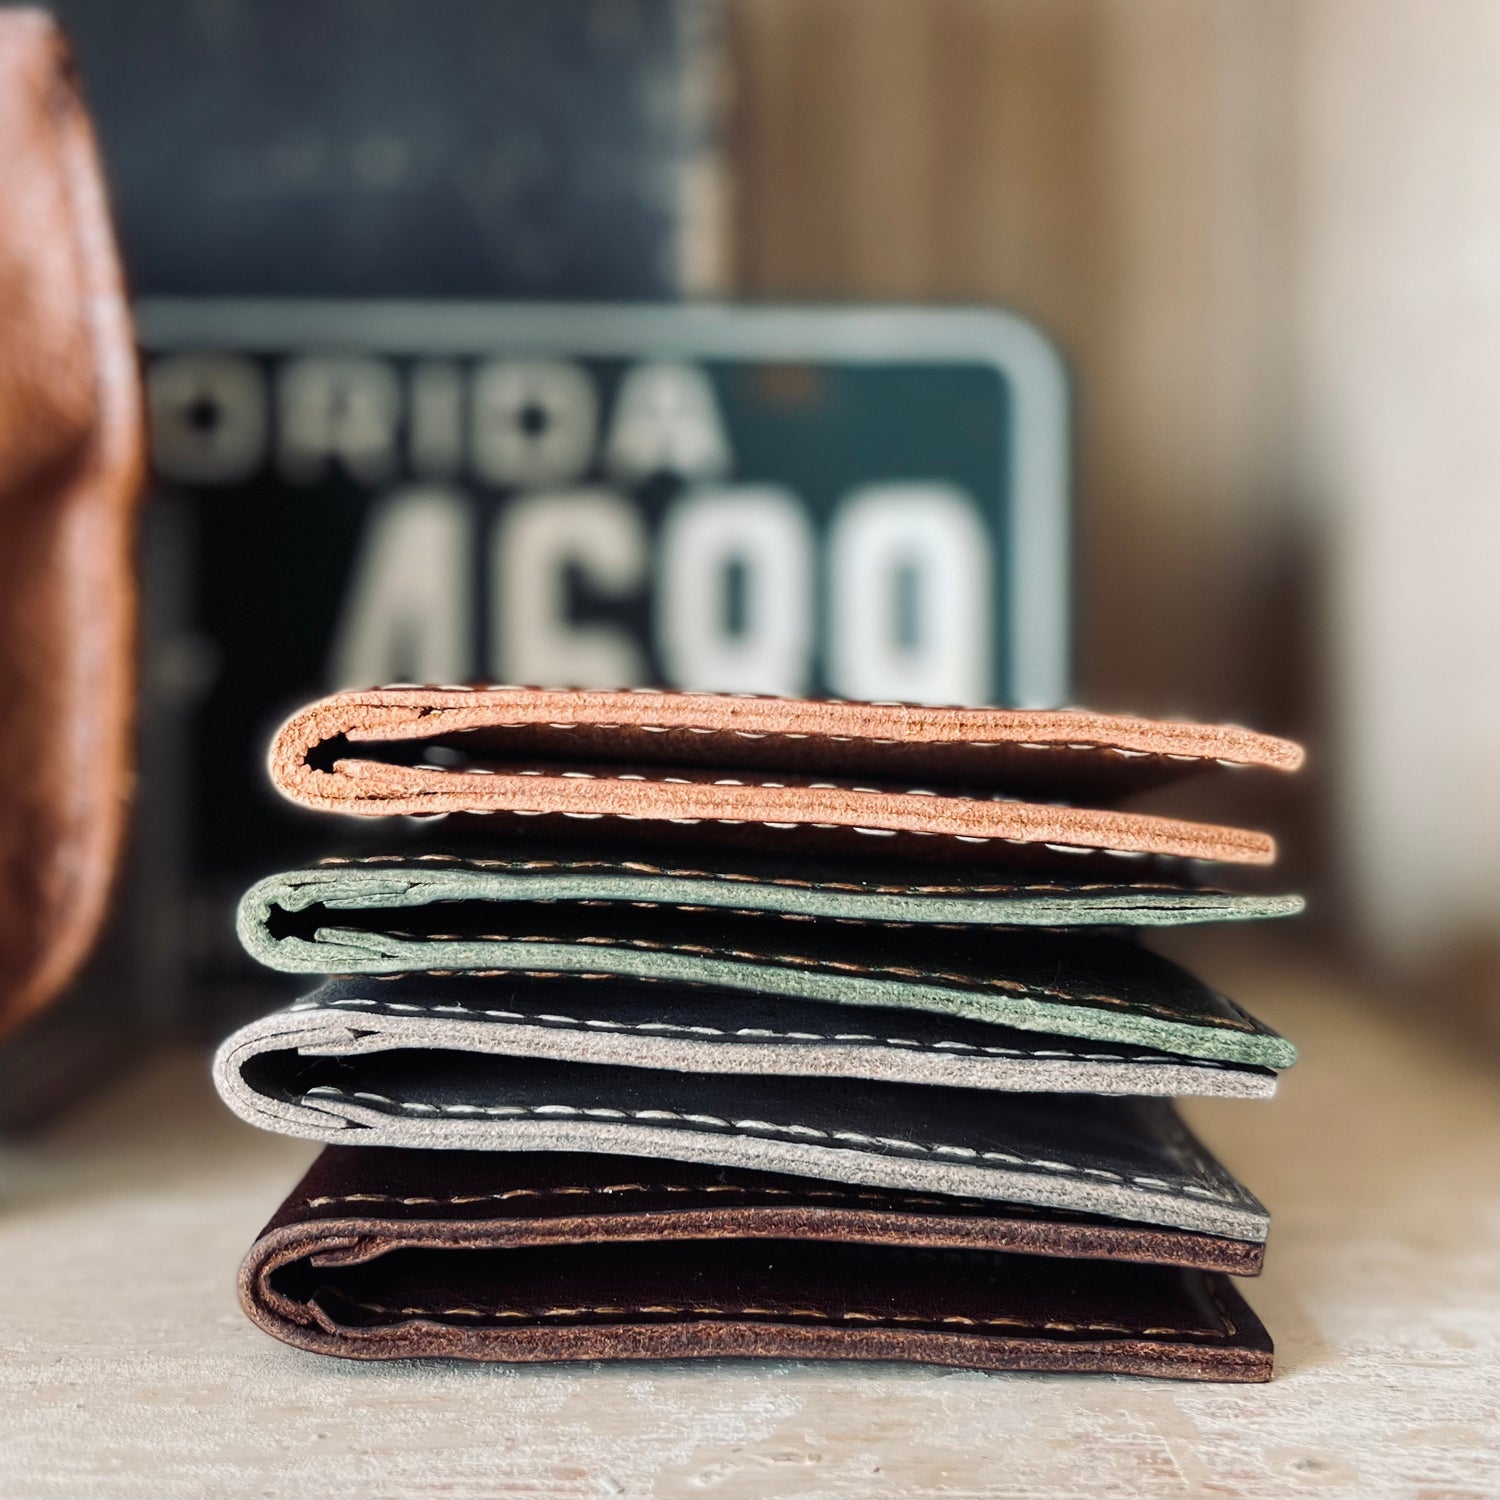 a stack view of the 1974 Finnegan wallet